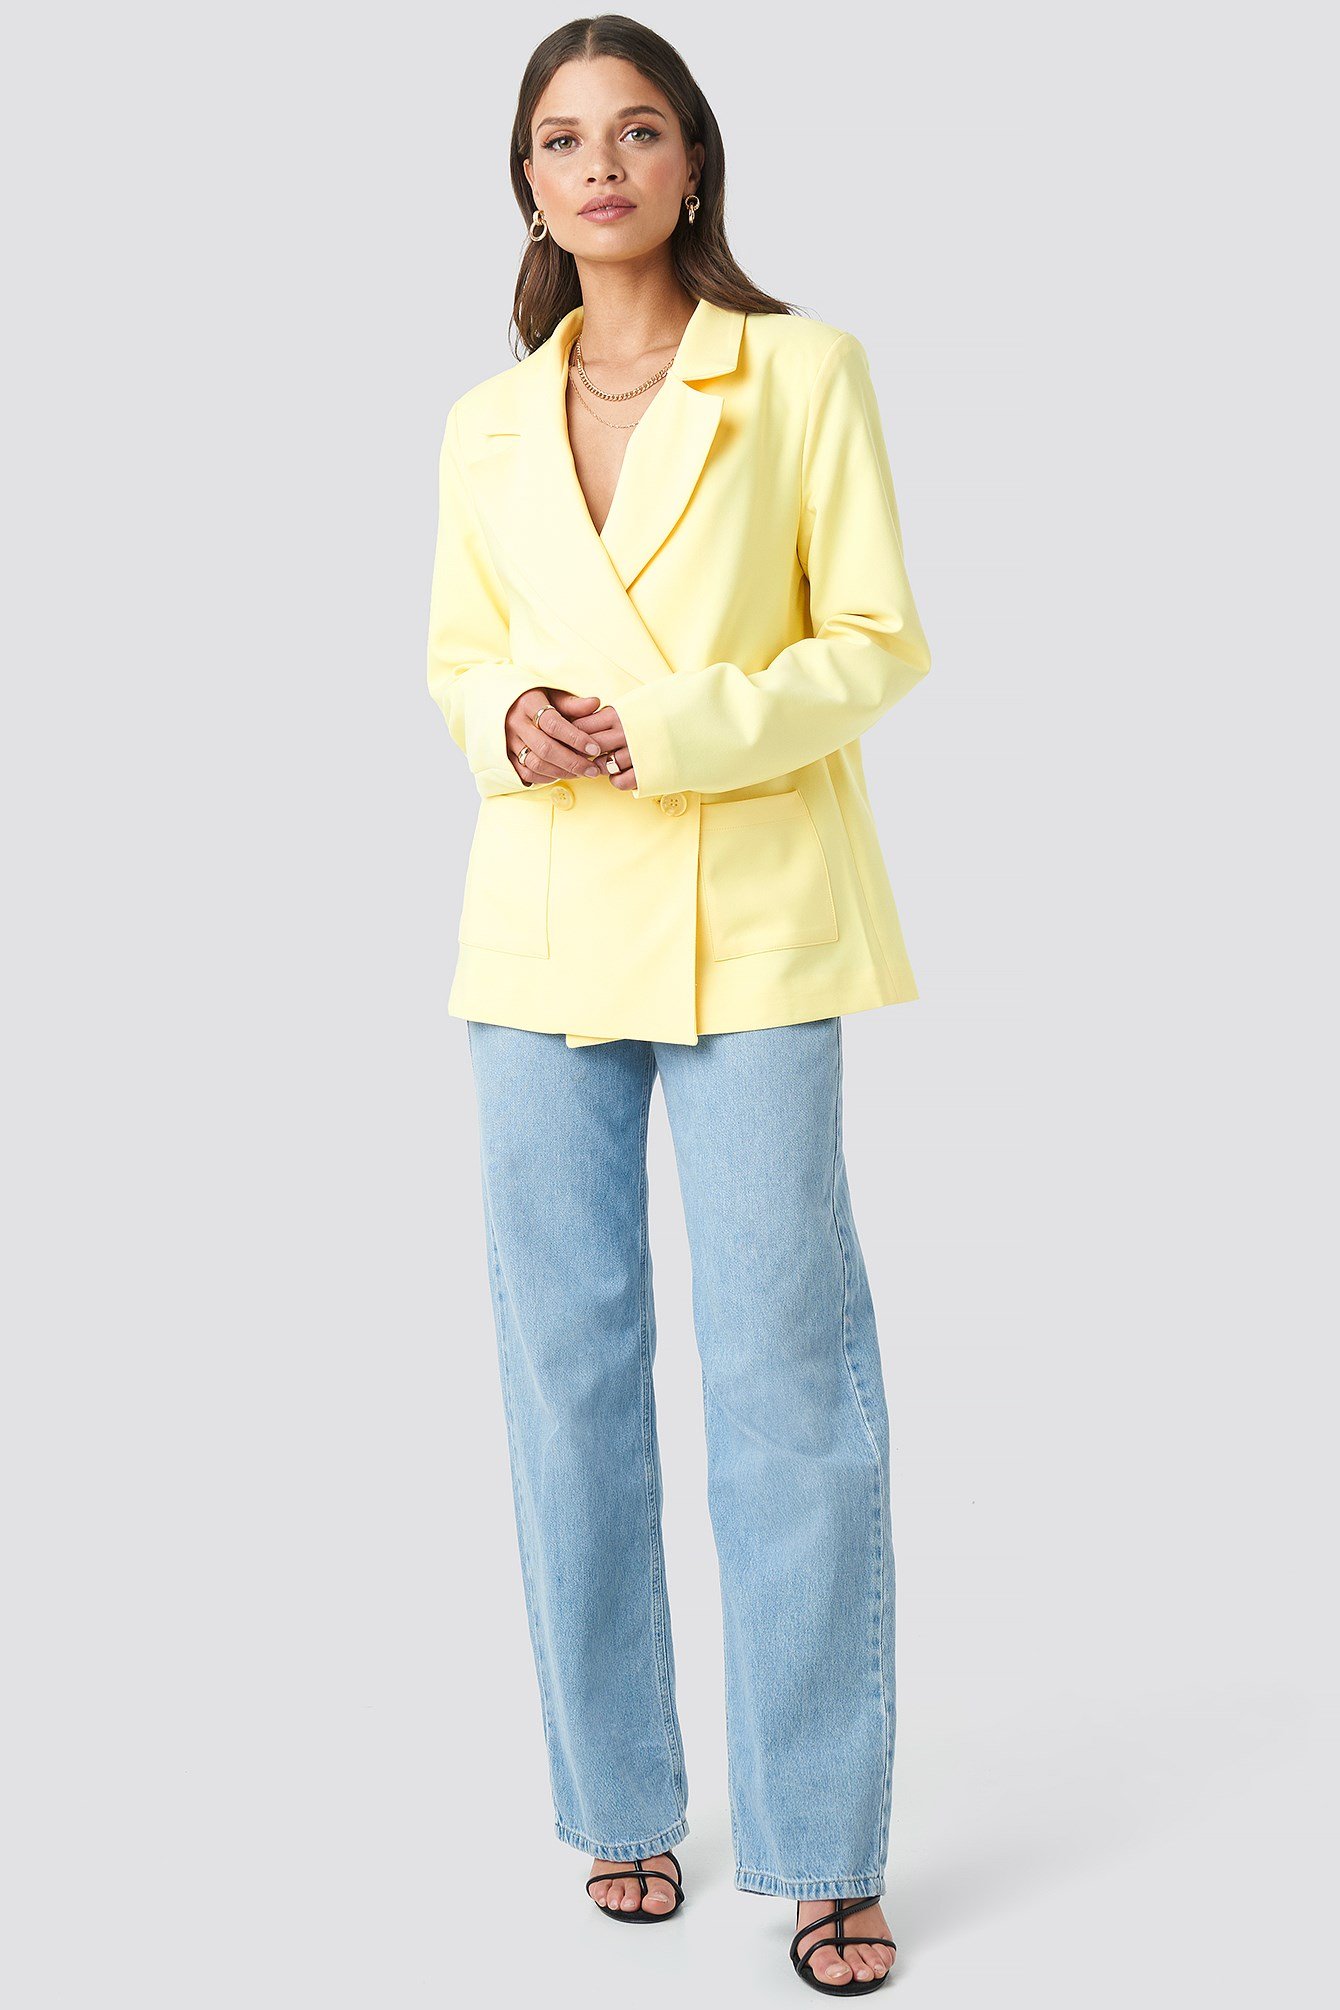 Front Pocket Oversized Blazer Yellow Outfit